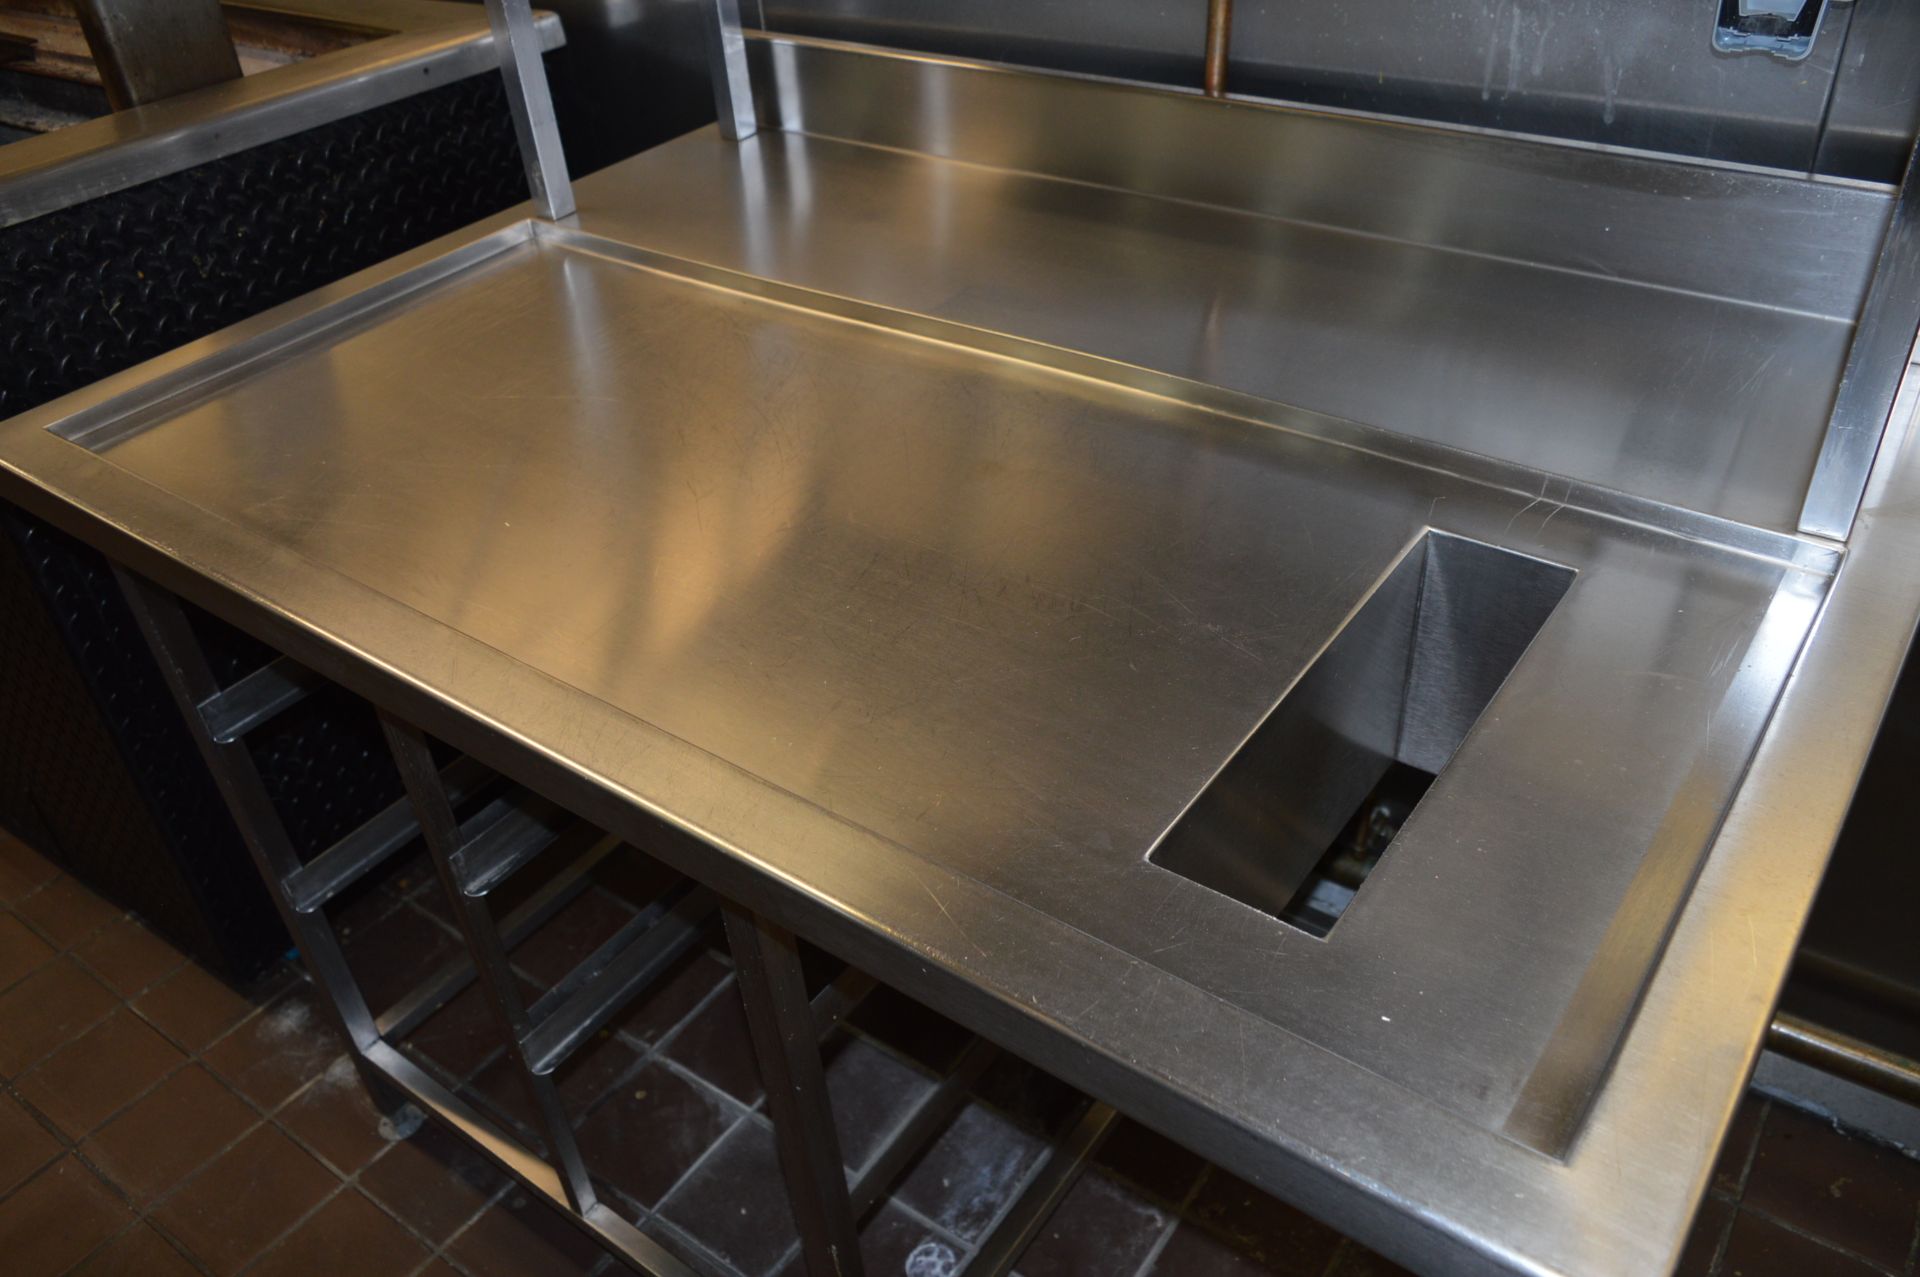 1 x Stainless Steel Prep Bench With Undercounter Shelves, Bin Chute and Overhead Shelves - H87/171 x - Image 4 of 7